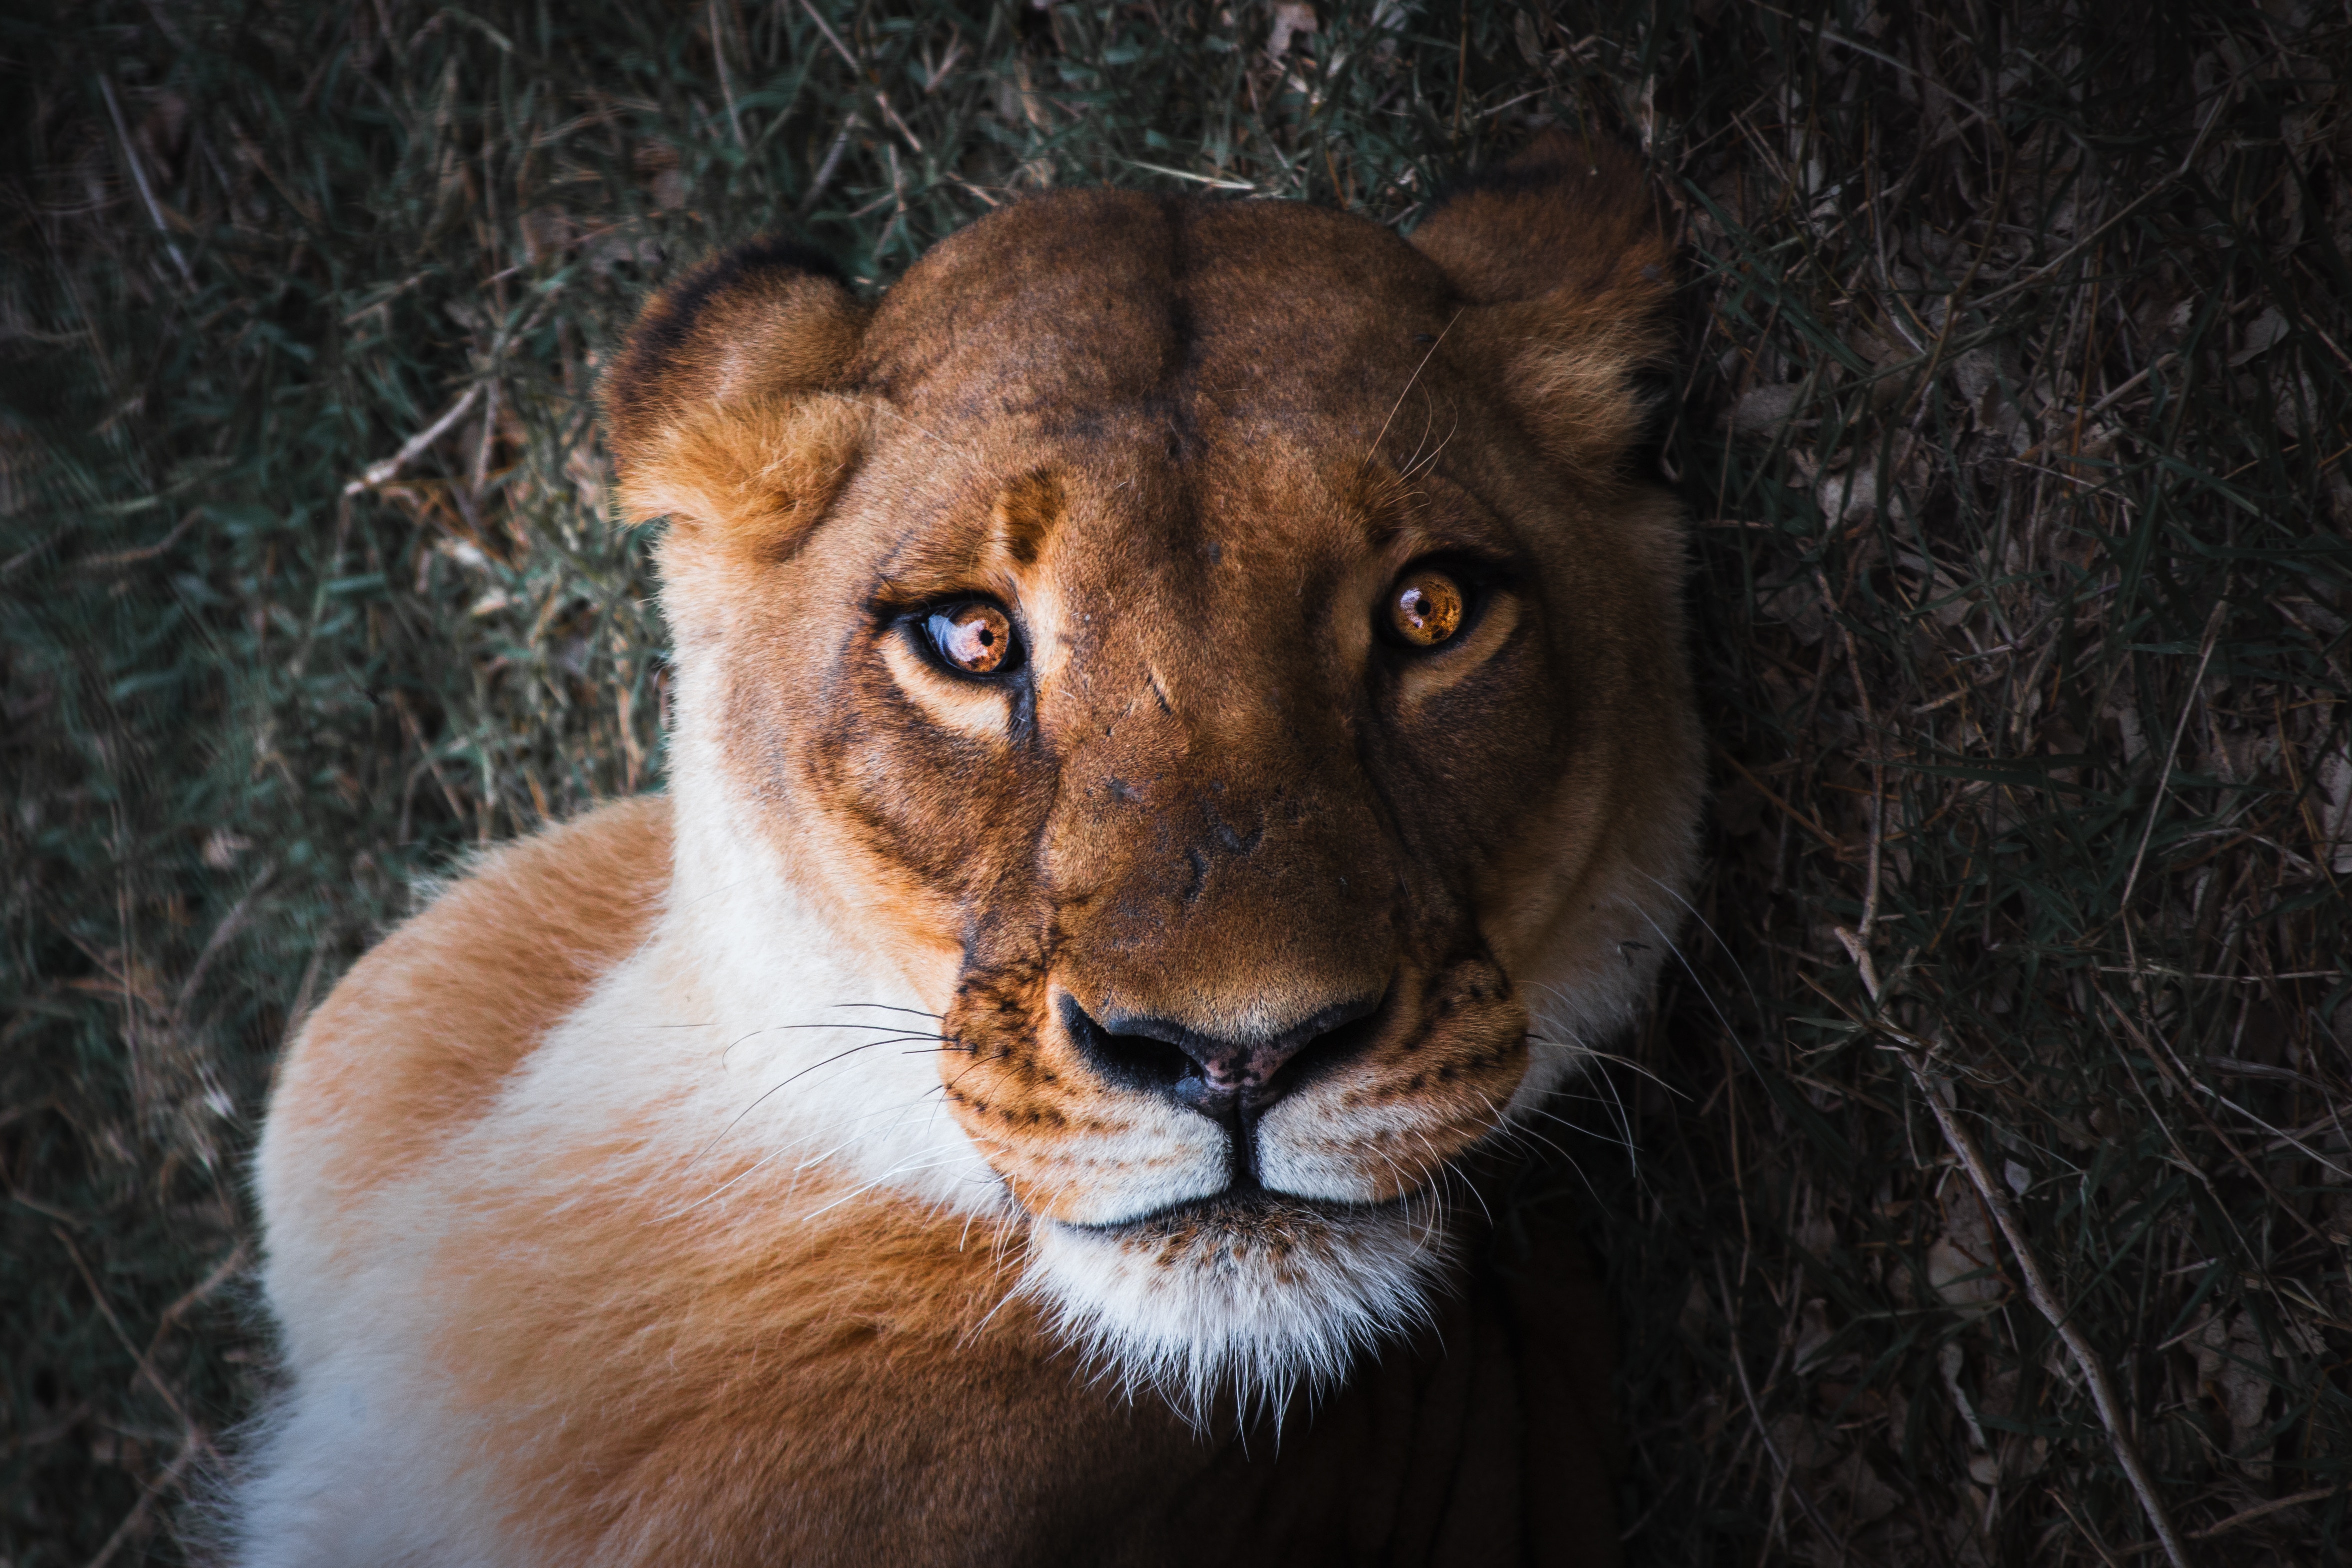 123368 Screensavers and Wallpapers Lioness for phone. Download animals, muzzle, lion, predator, sight, opinion, lioness, charming, glamorous pictures for free